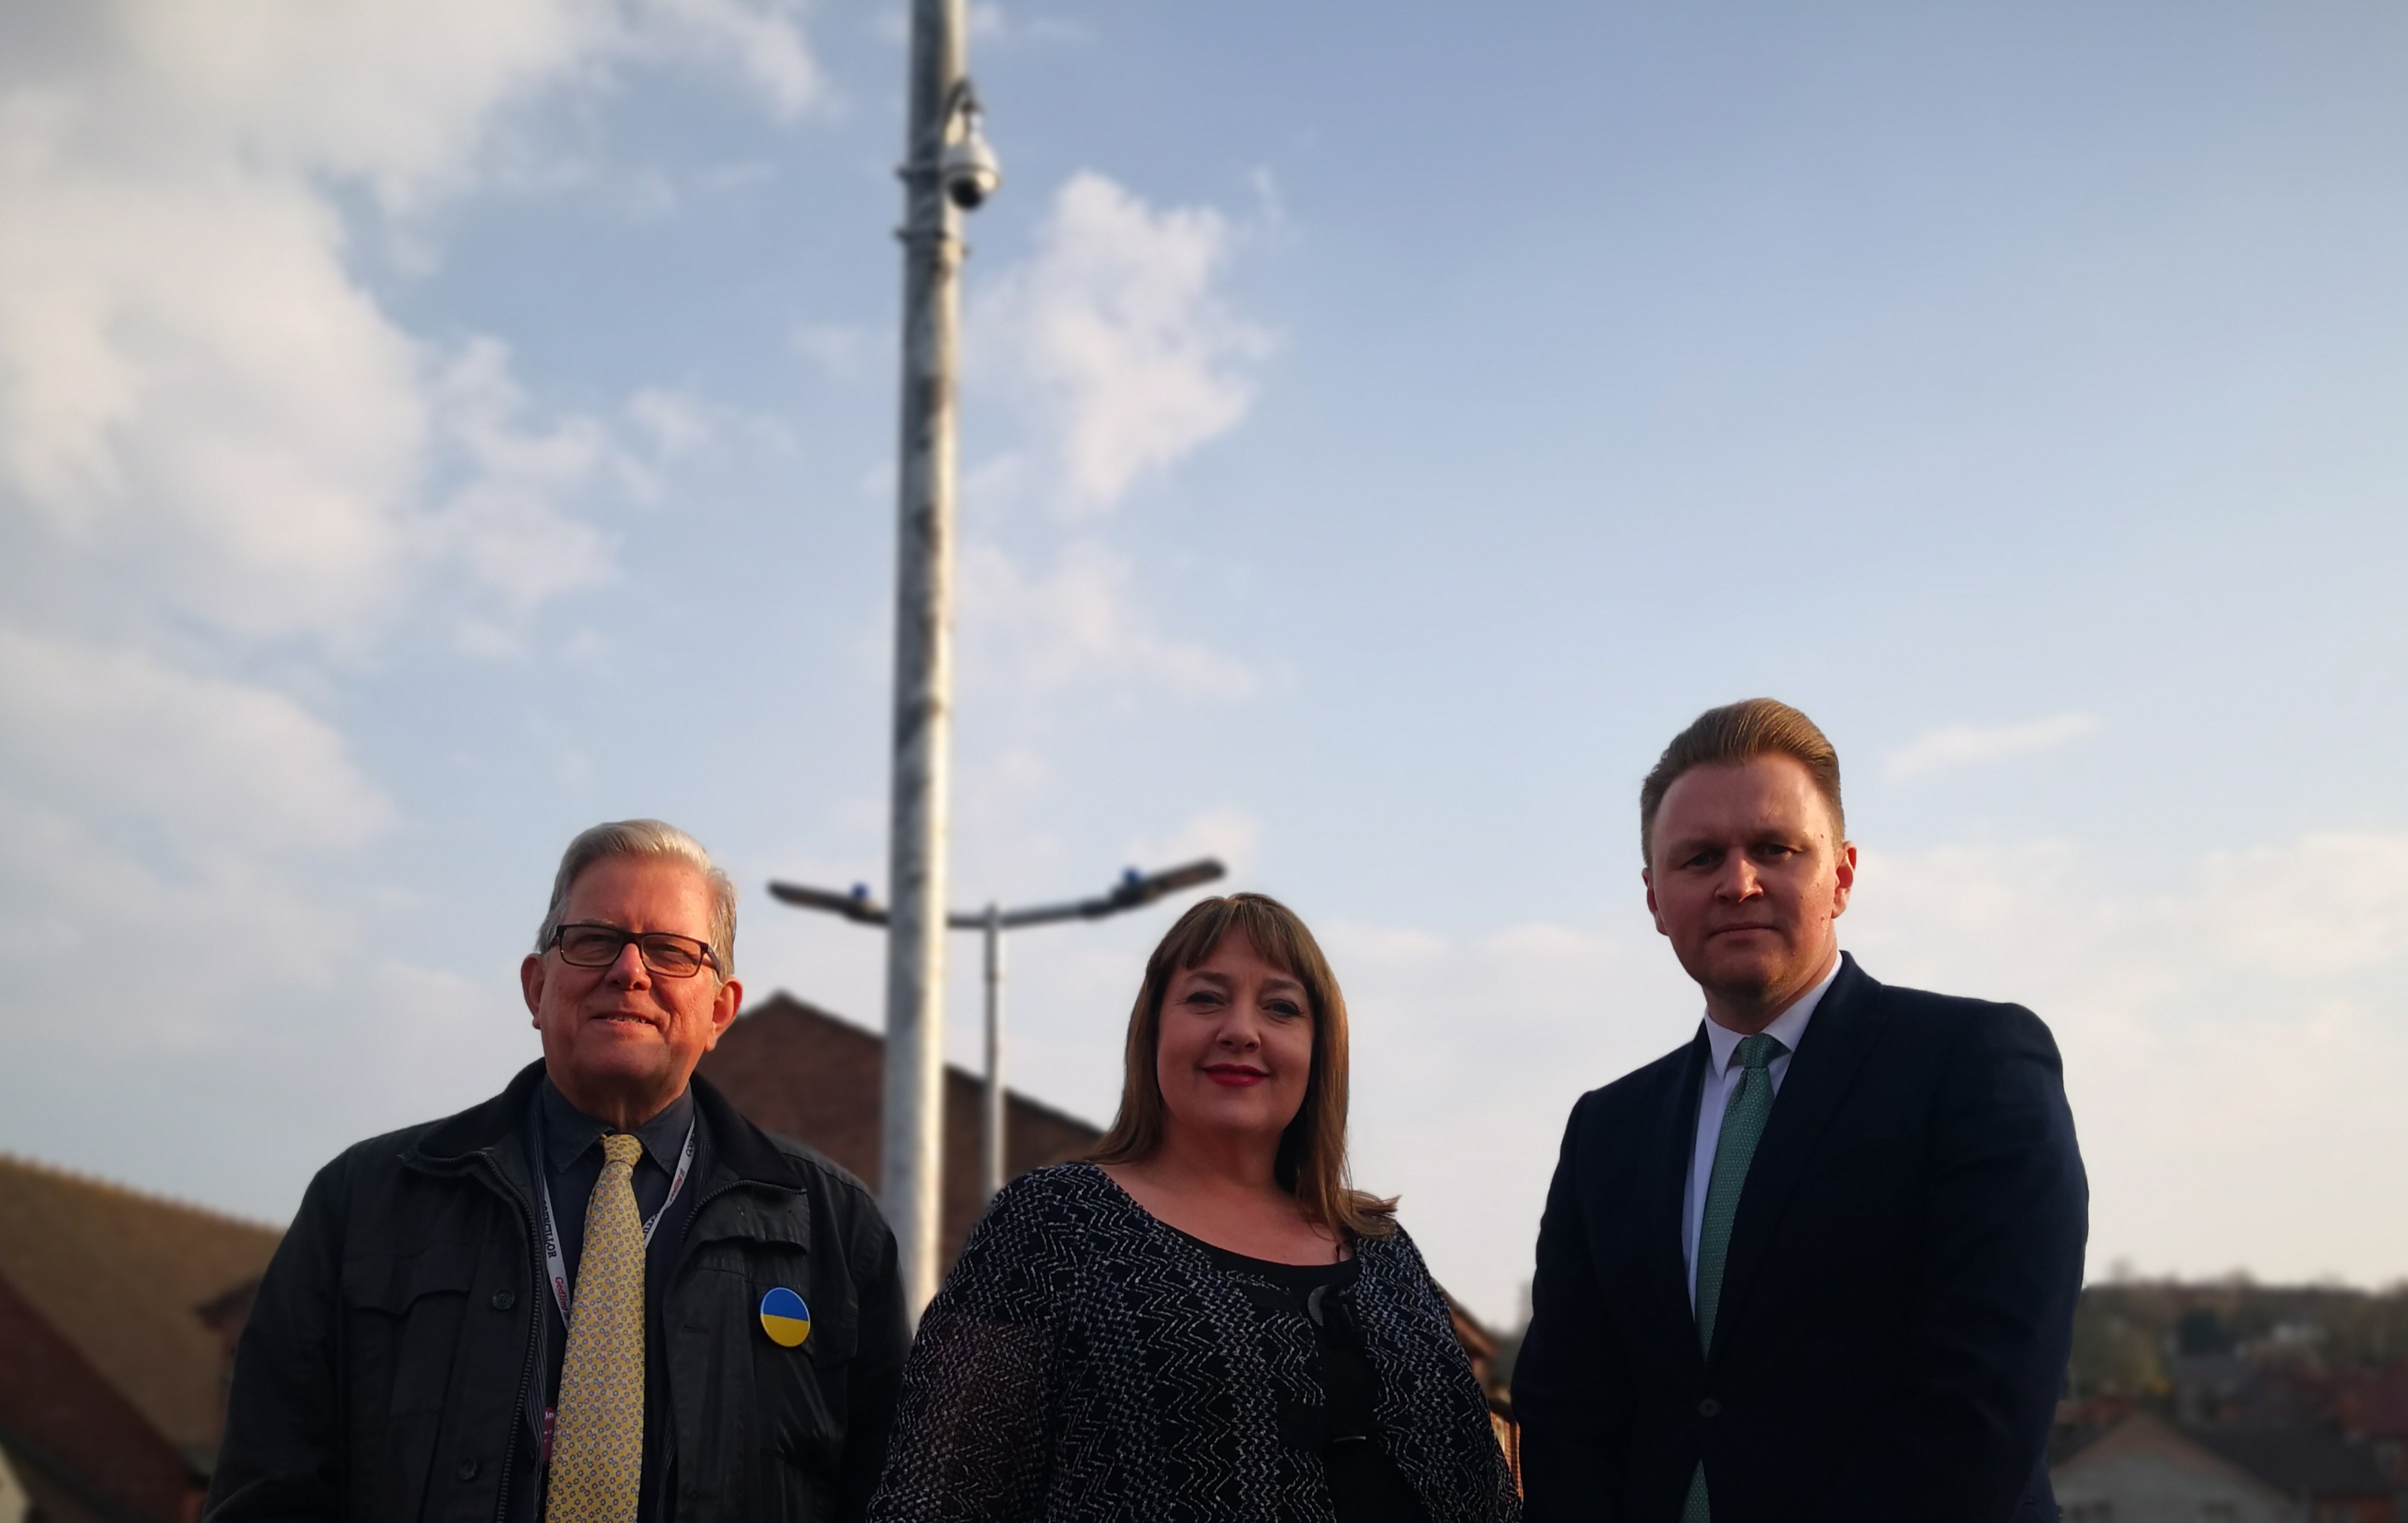 From left to right, Leader of Gedling Borough Council, Councillor John Clarke MBE, Nottinghamshire Police and Crime Commissioner, Caroline Henry and Deputy Leader of Gedling Borough Council, Councillor Michael Payne in front of the new CCTV Camera at Carlton Square